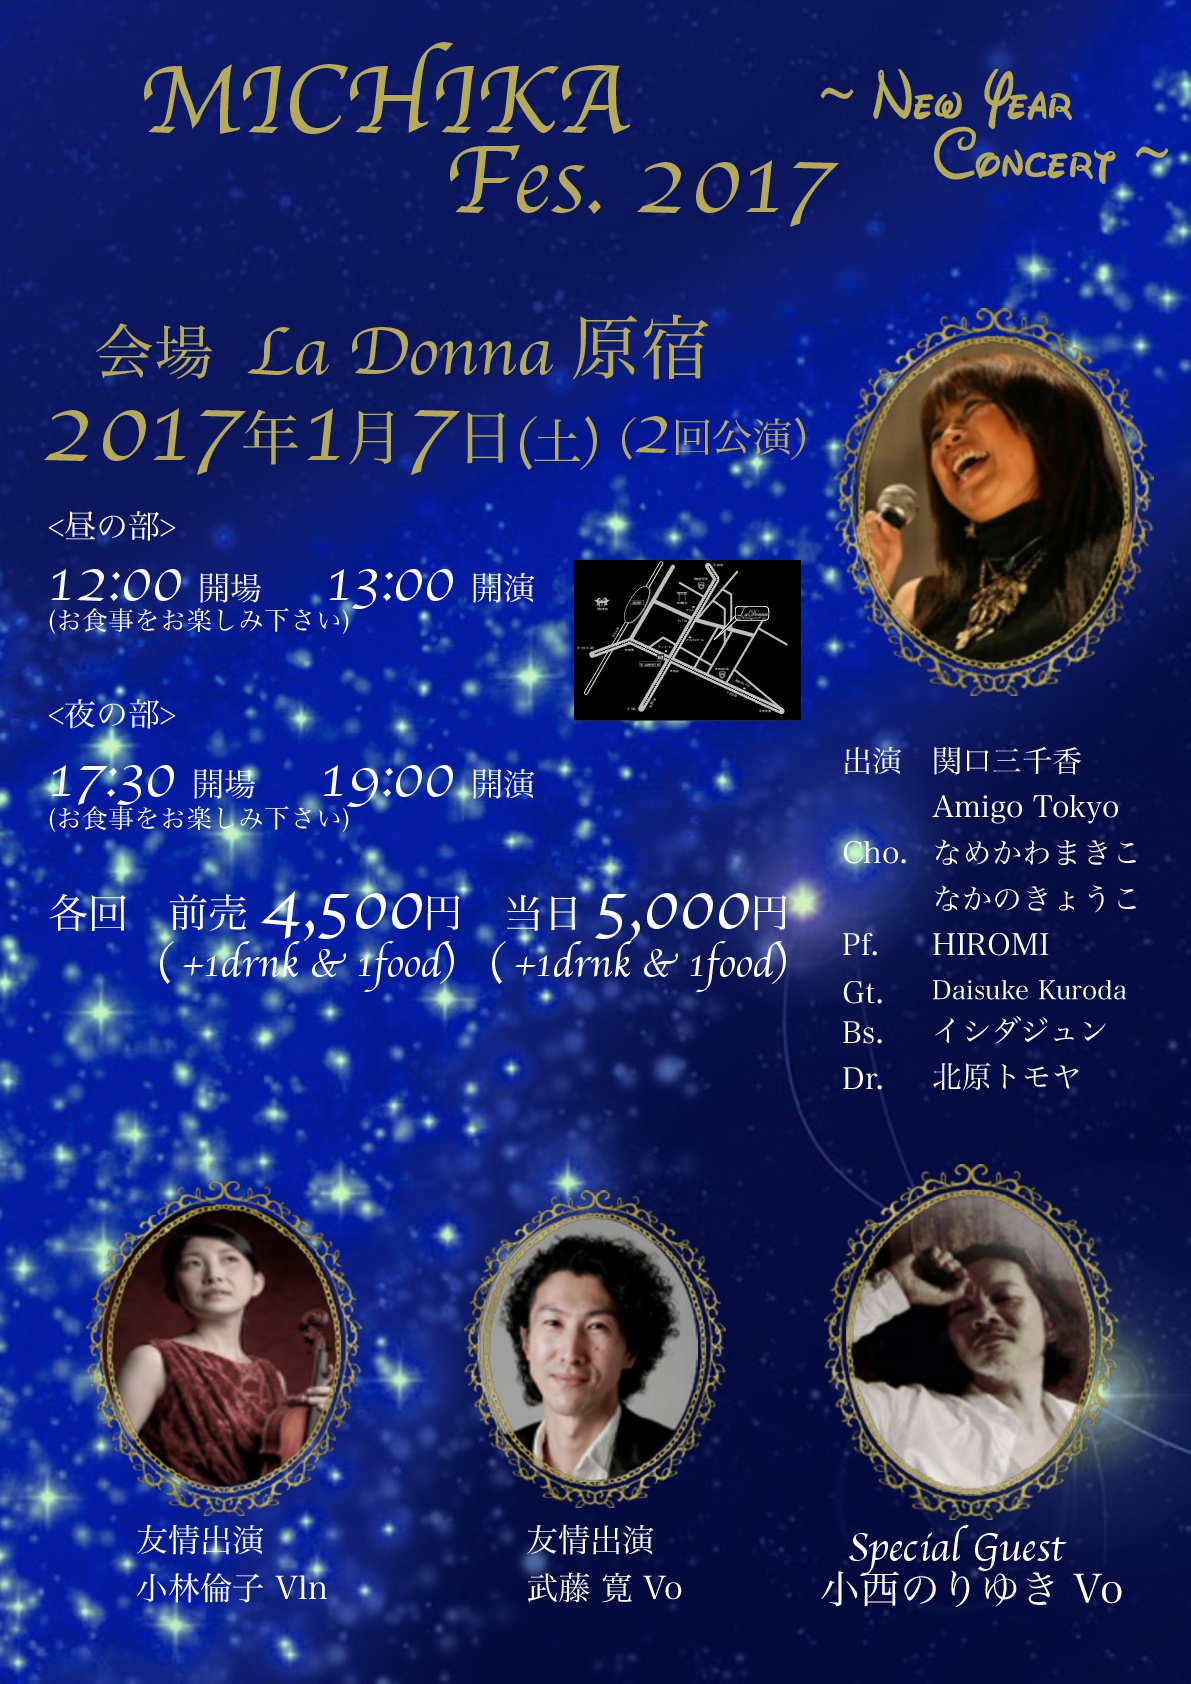 MICHIKA Fes.2017 ～New Year Concert～